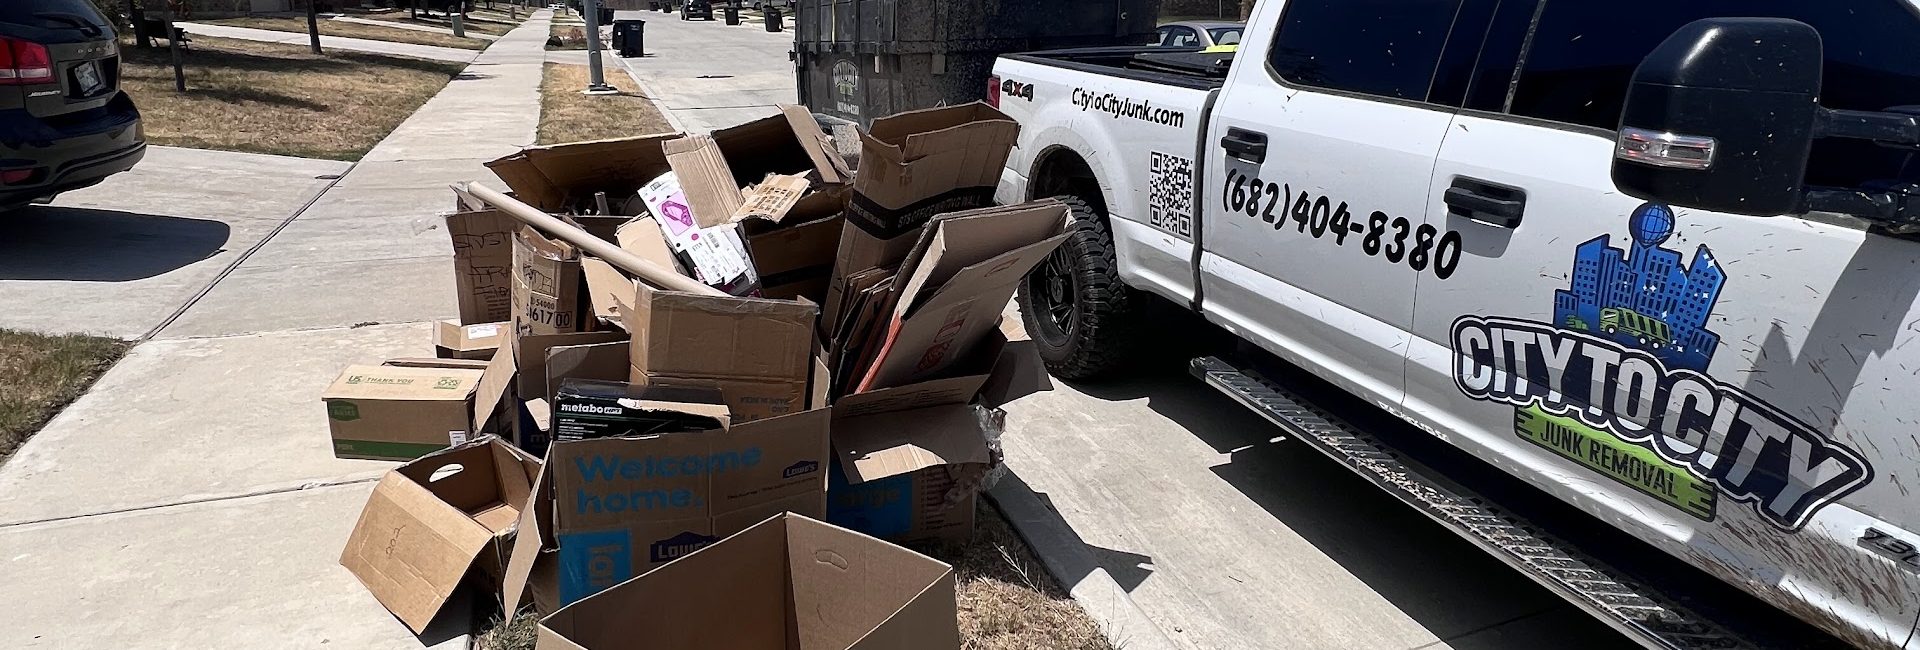 City to City Junk Removal and Trash Disposal Service In Fort Worth 2